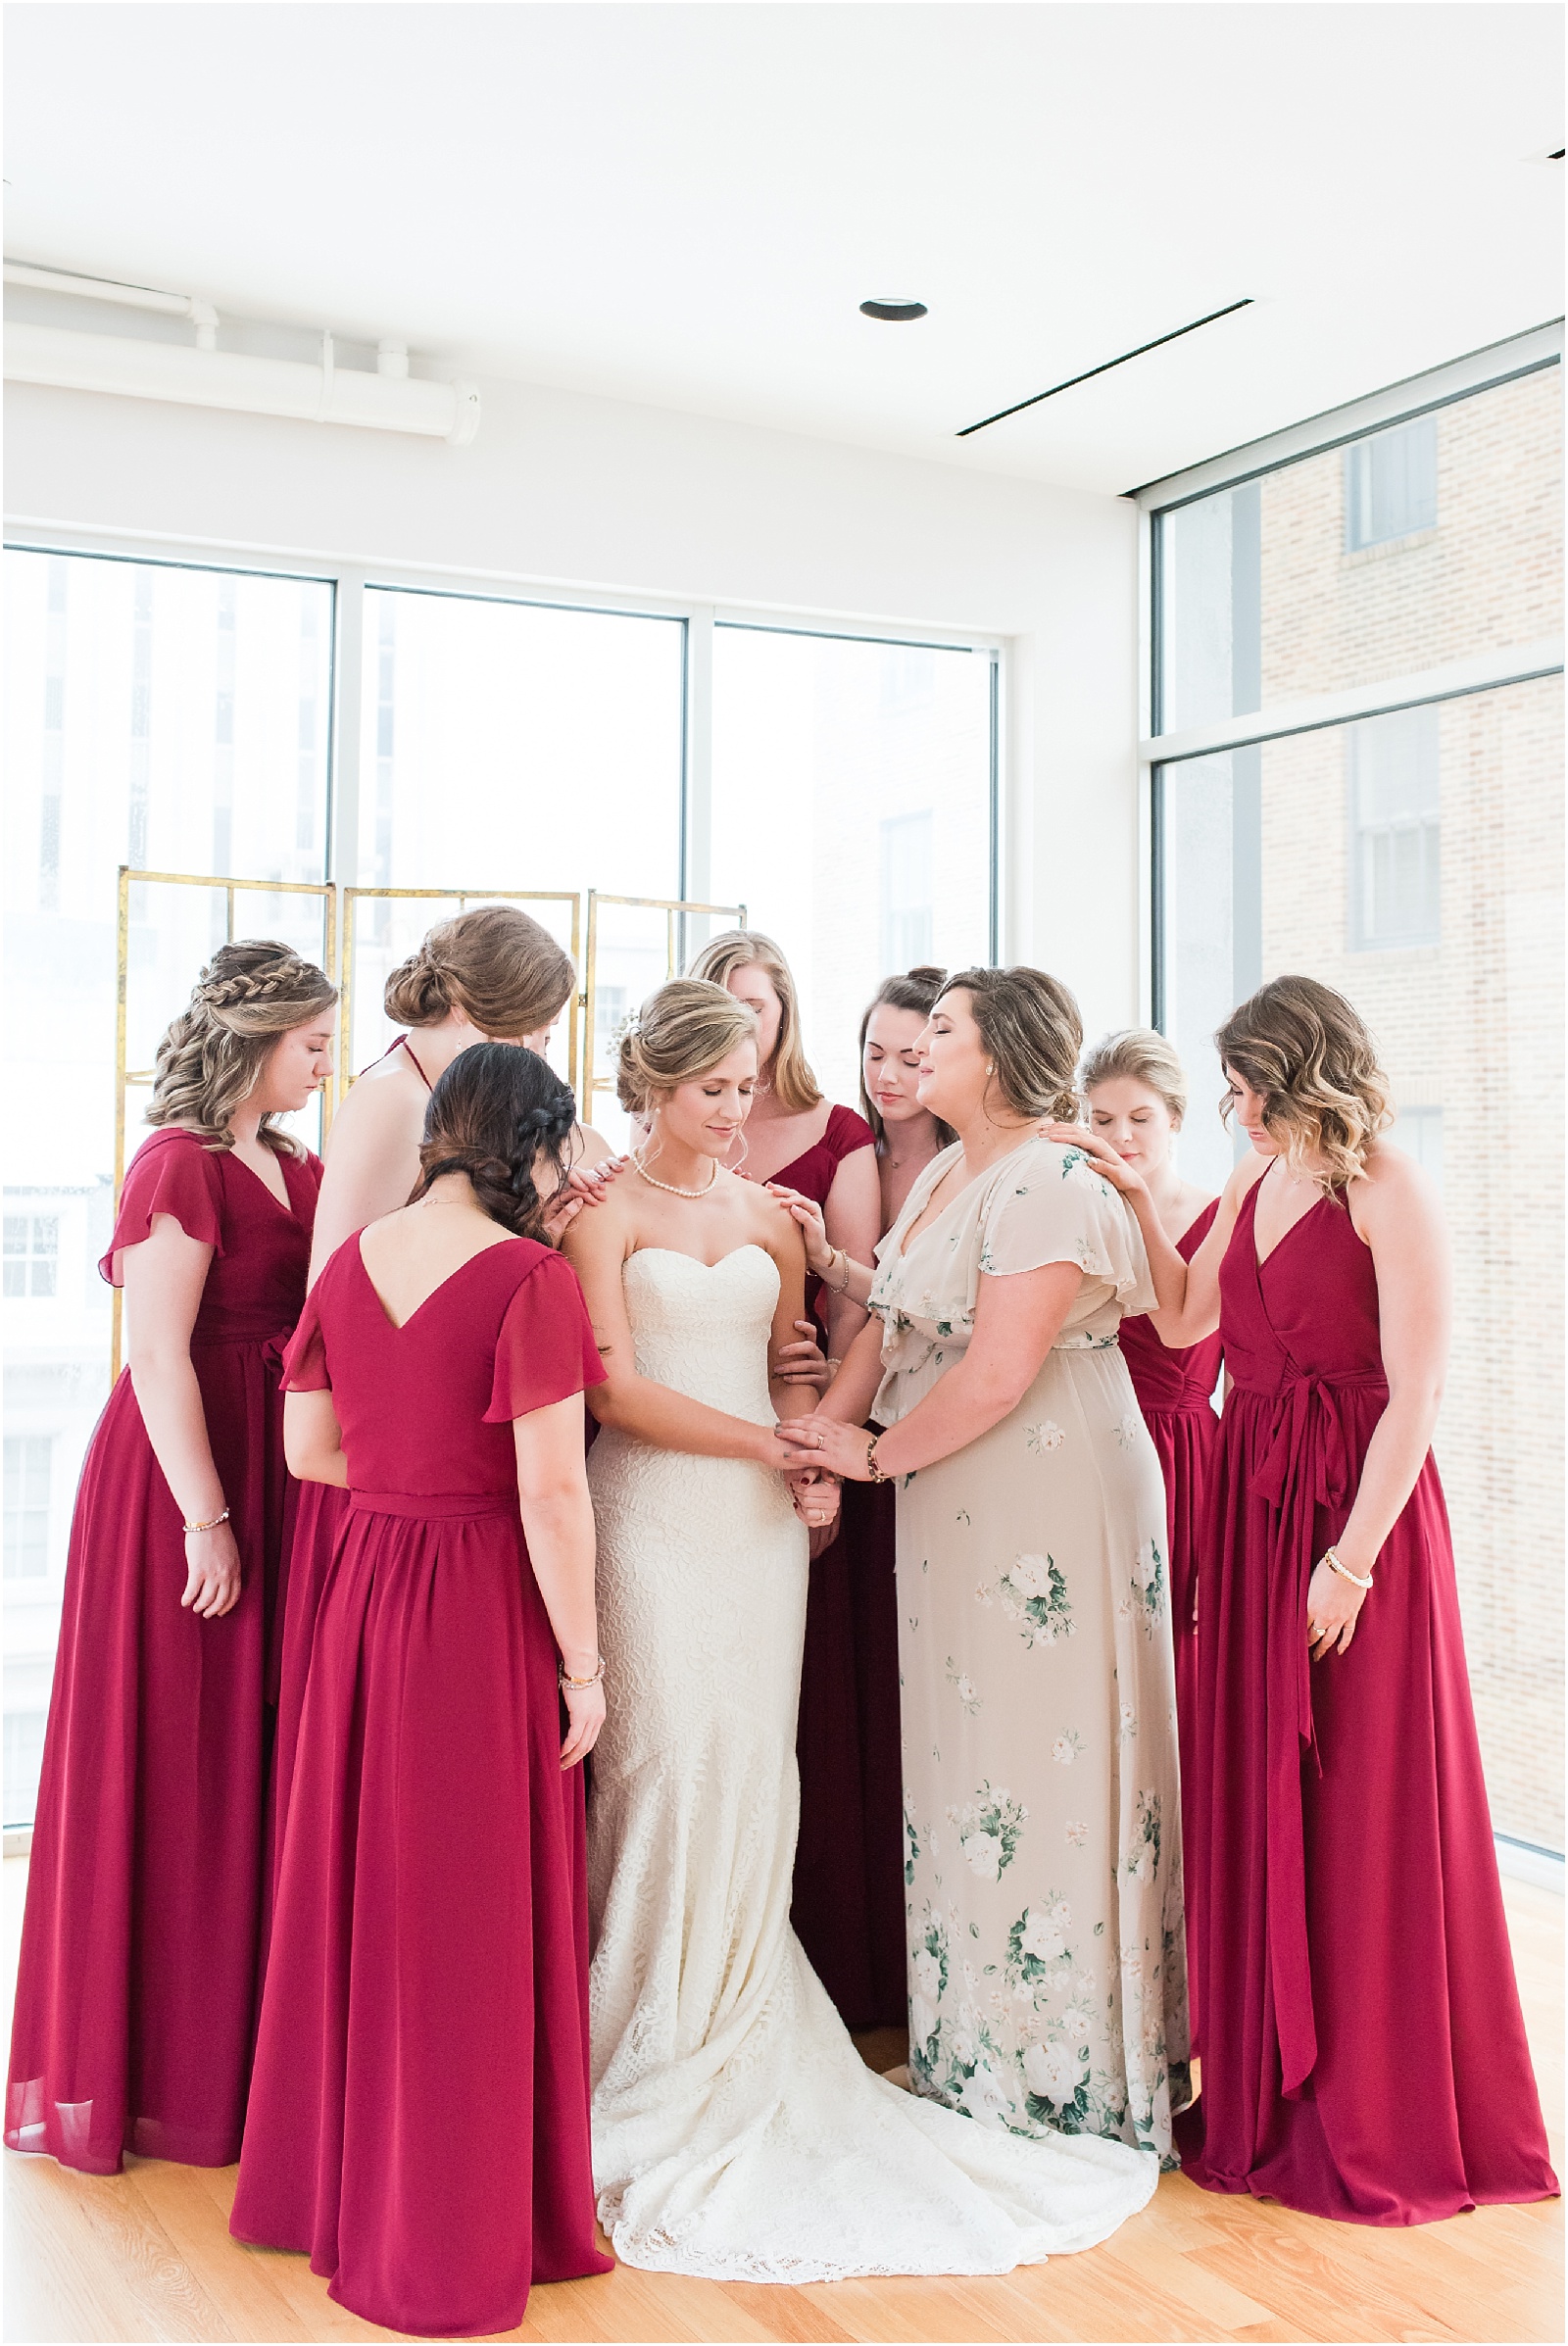 Bride in her bridal gown with bridesmaids in red full length dresses praying with bride at the glass box